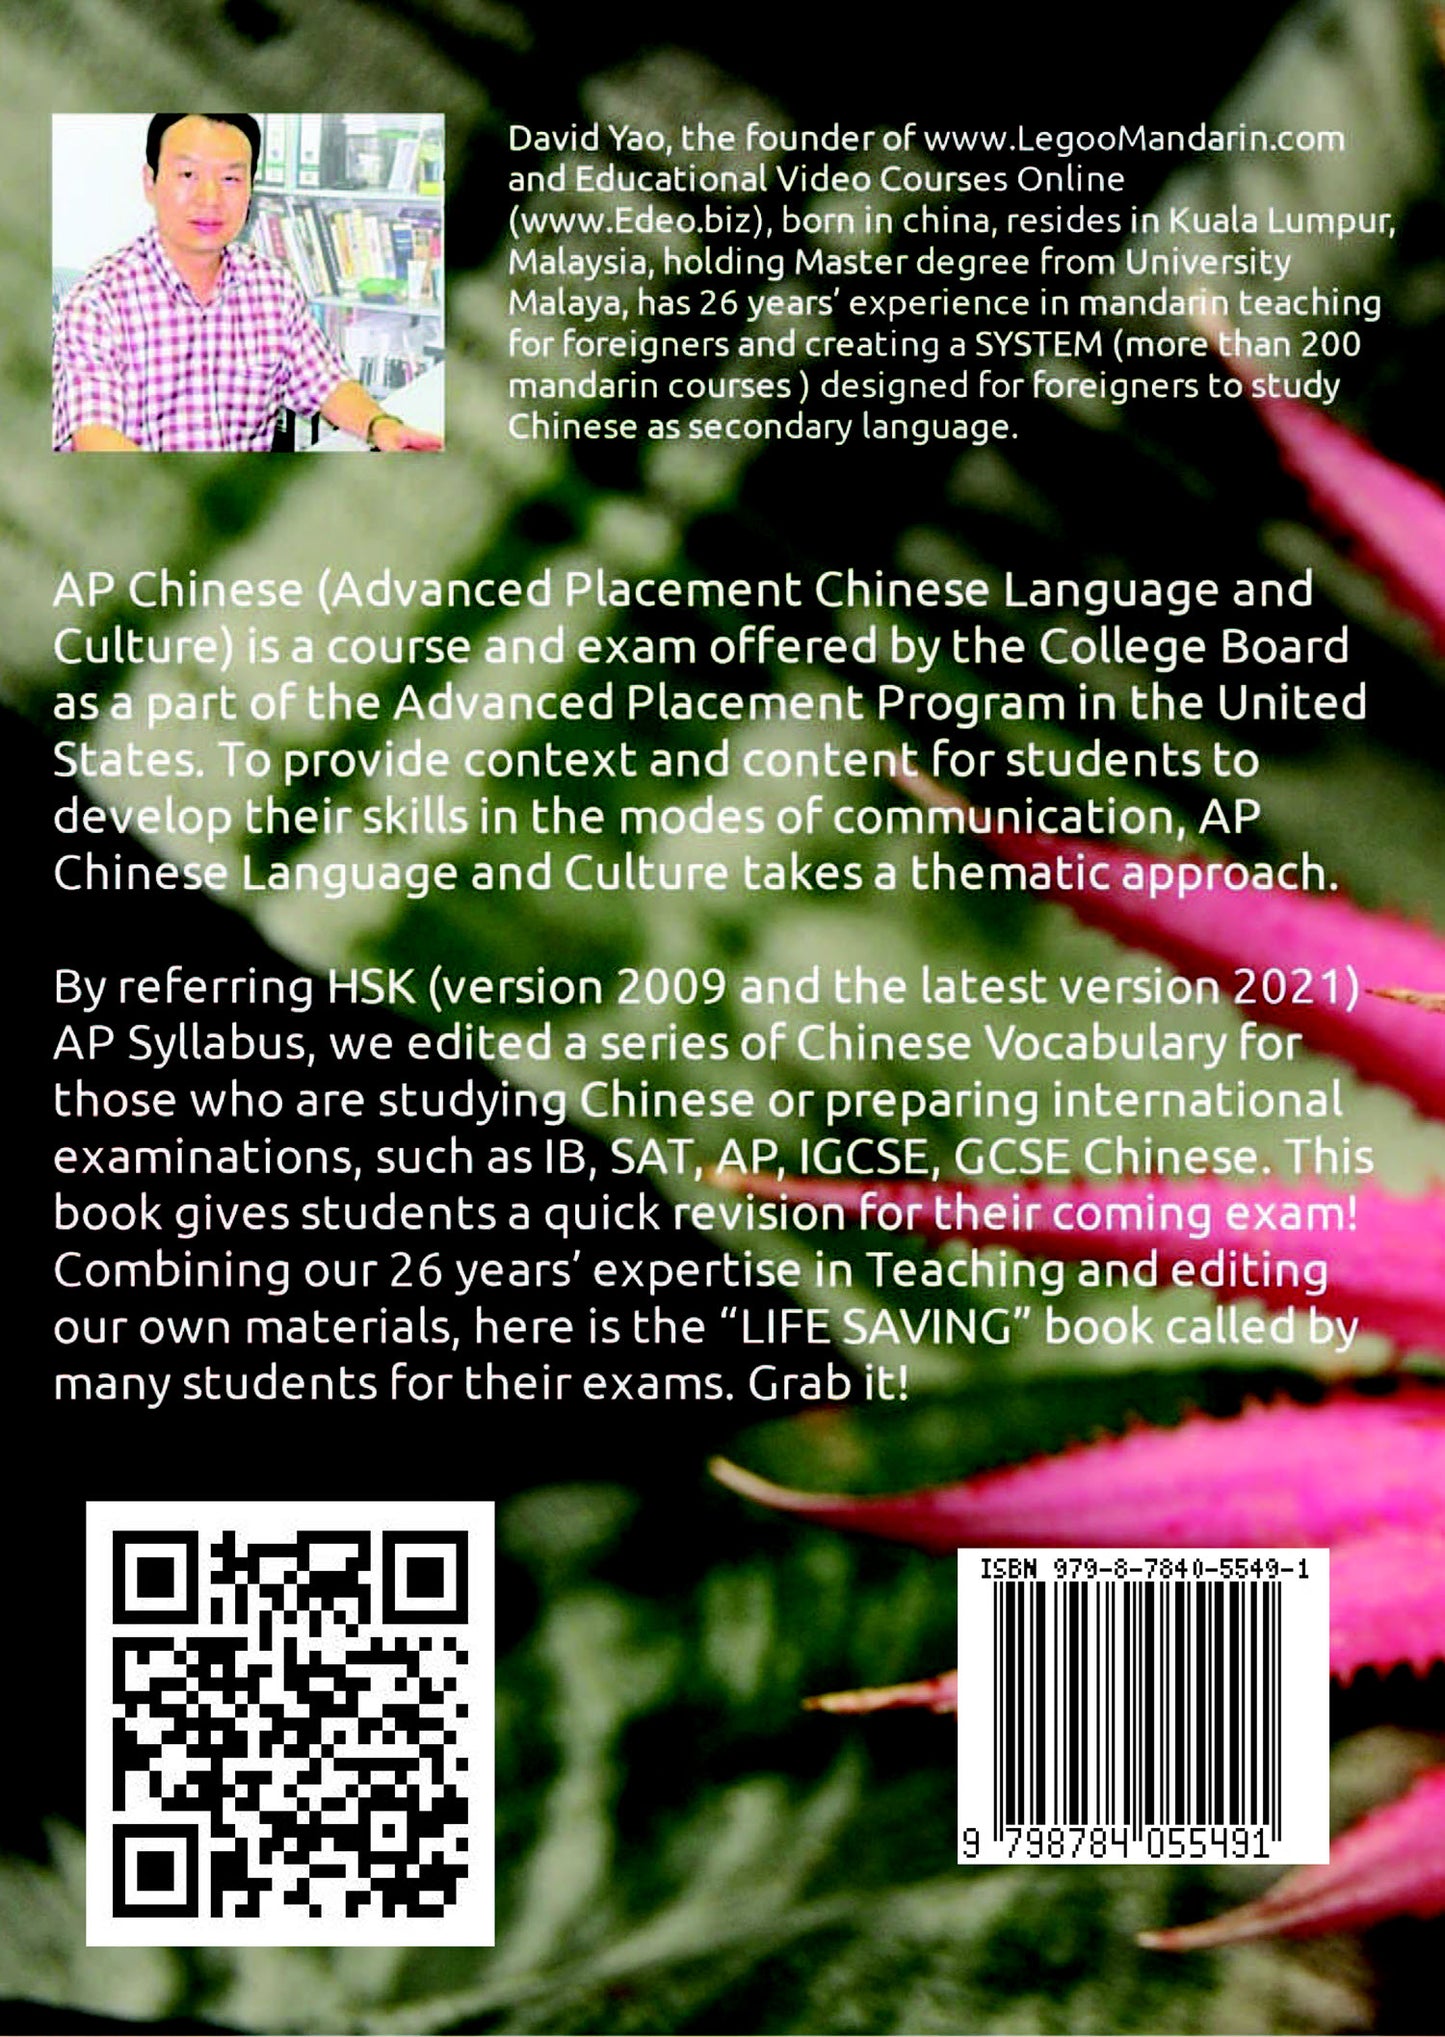 Theme-based Chinese Vocabulary for AP Chinese Edition 2022